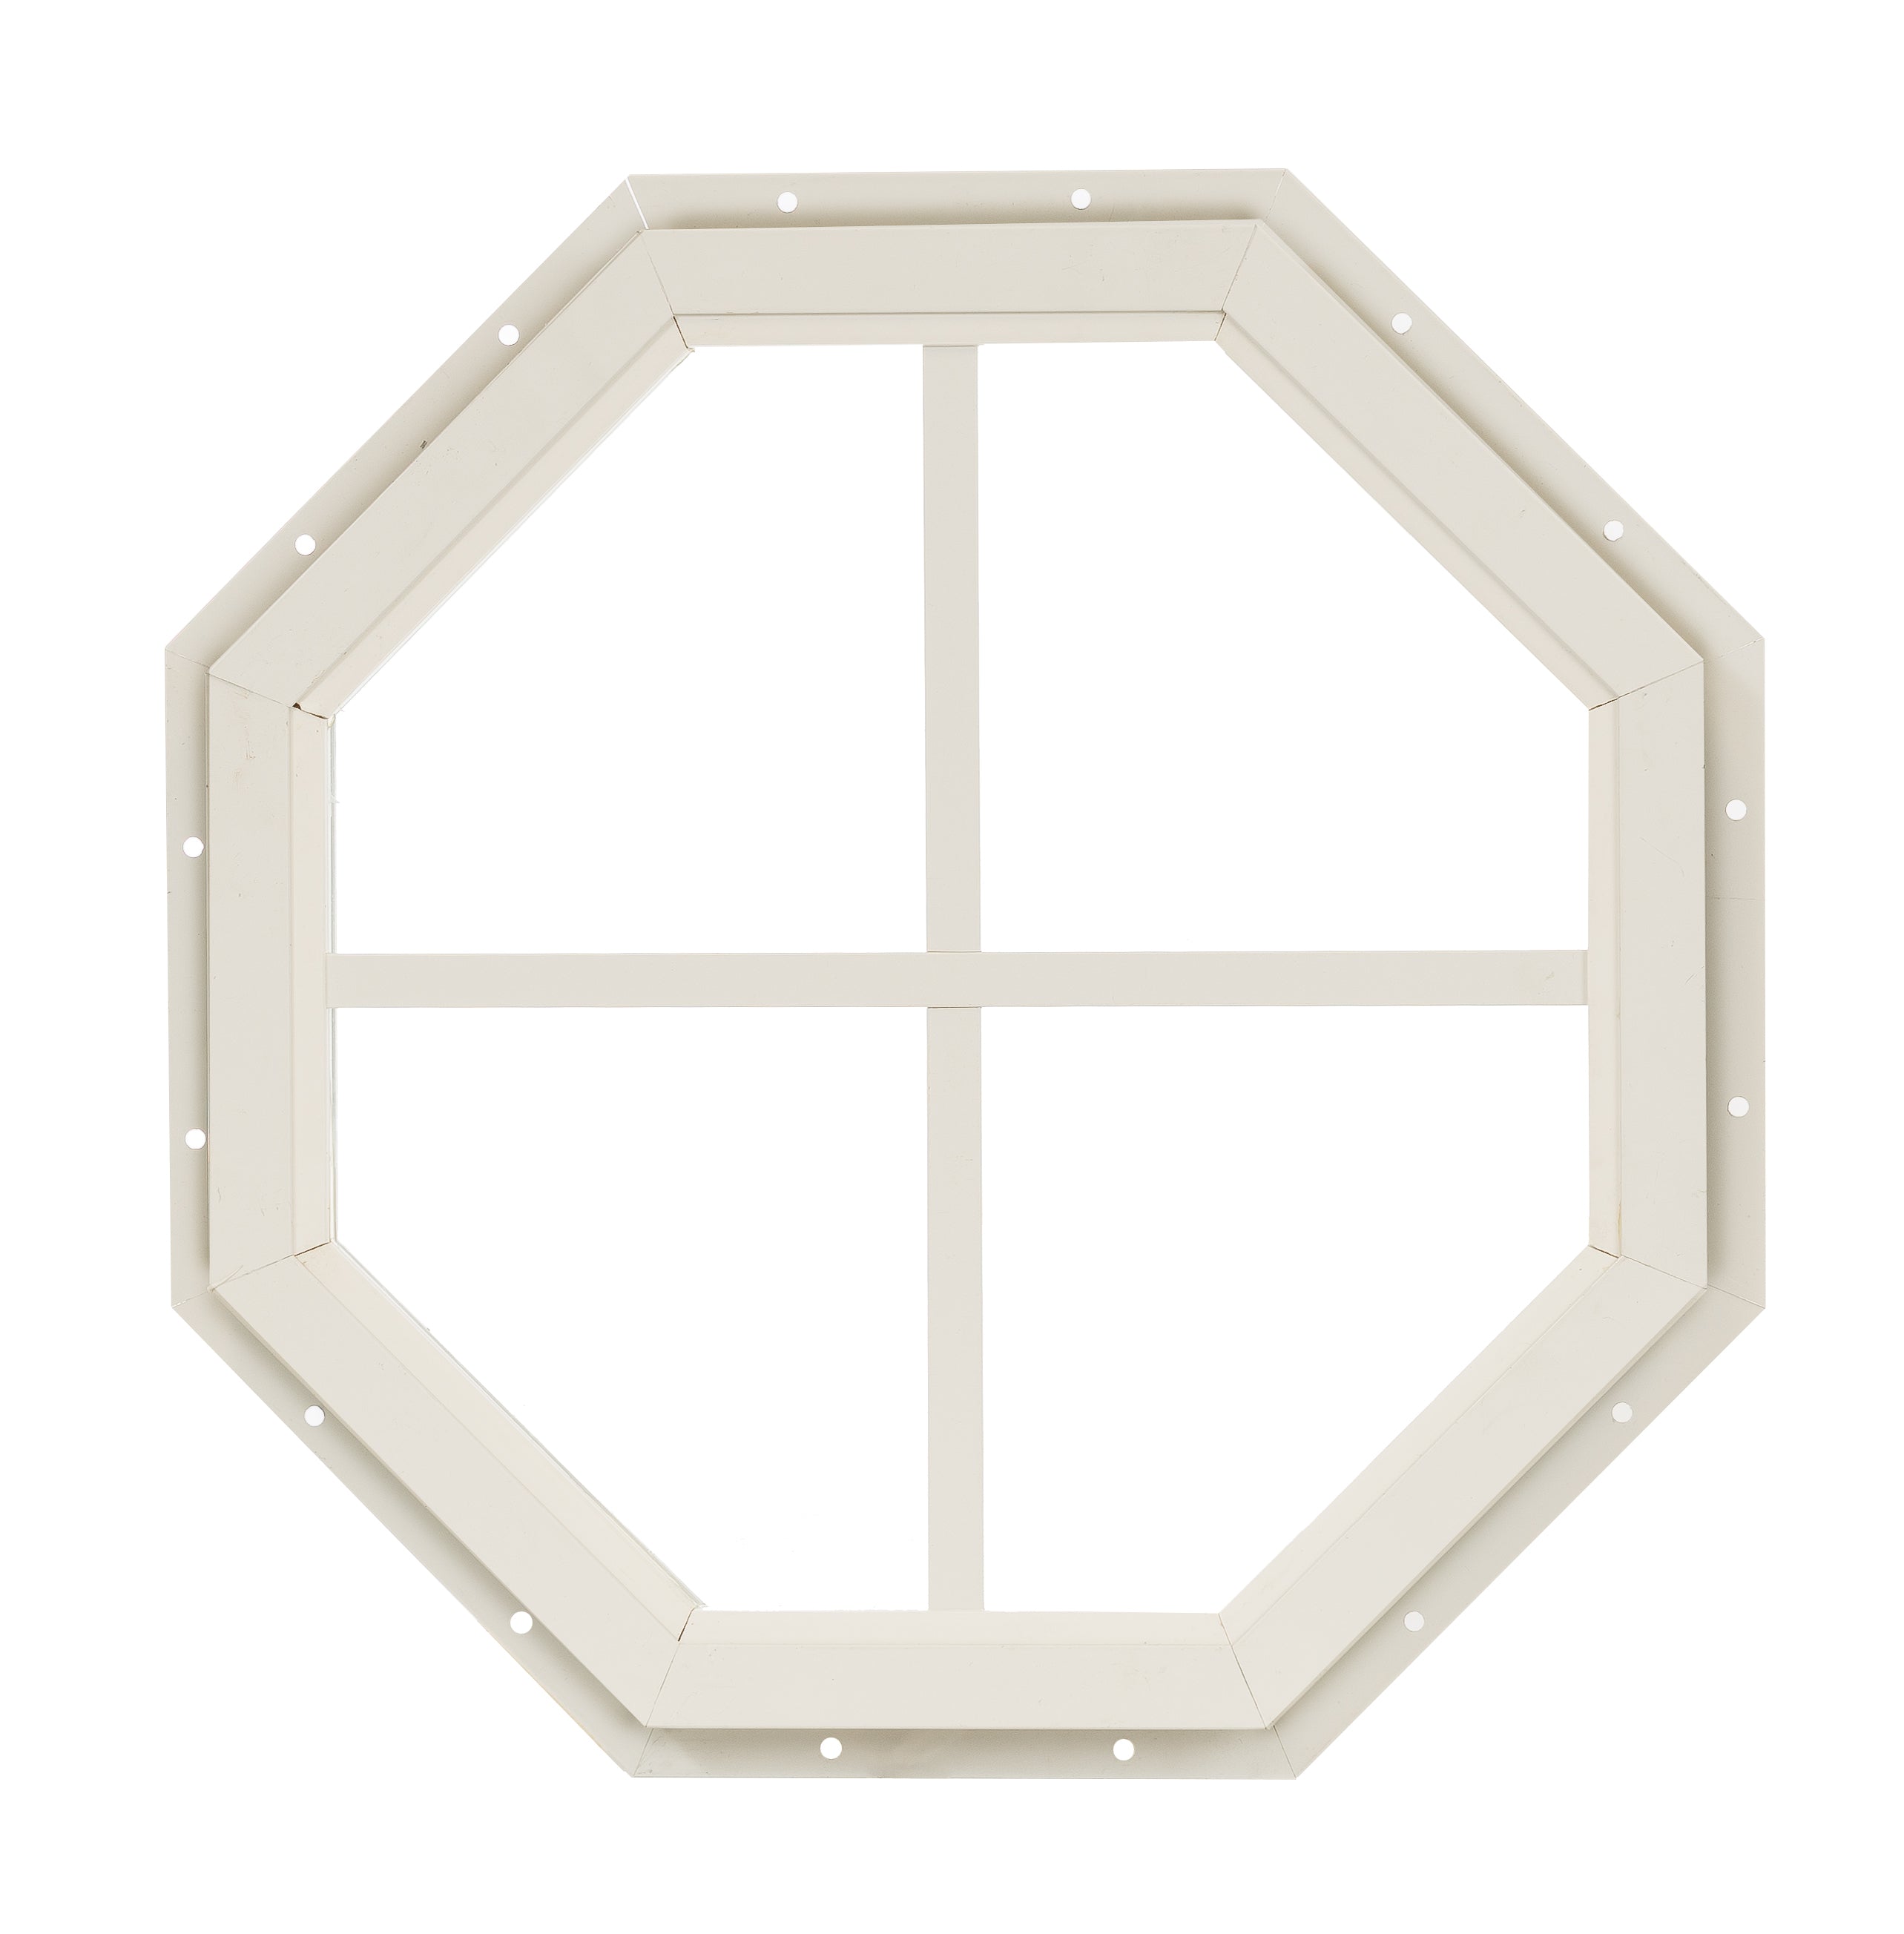 18" Octagon Gable J-Lap Mount White Window for Sheds, Playhouses, and MORE